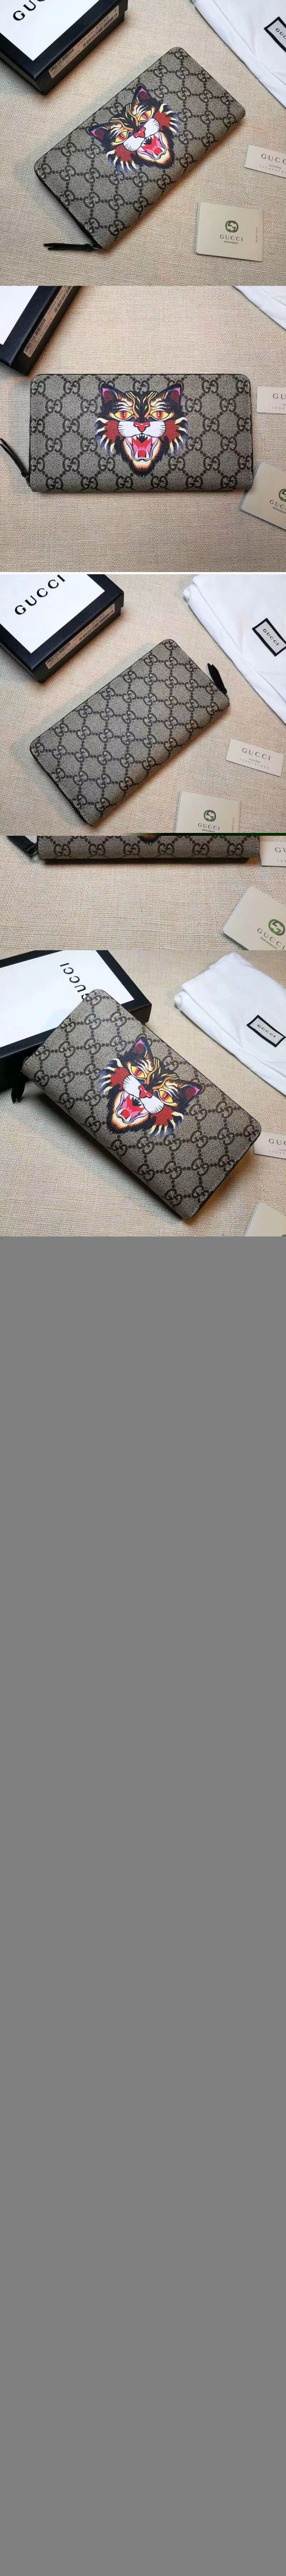 Replica Gucci 451273 Angry Cat print GG Supreme zip around wallet